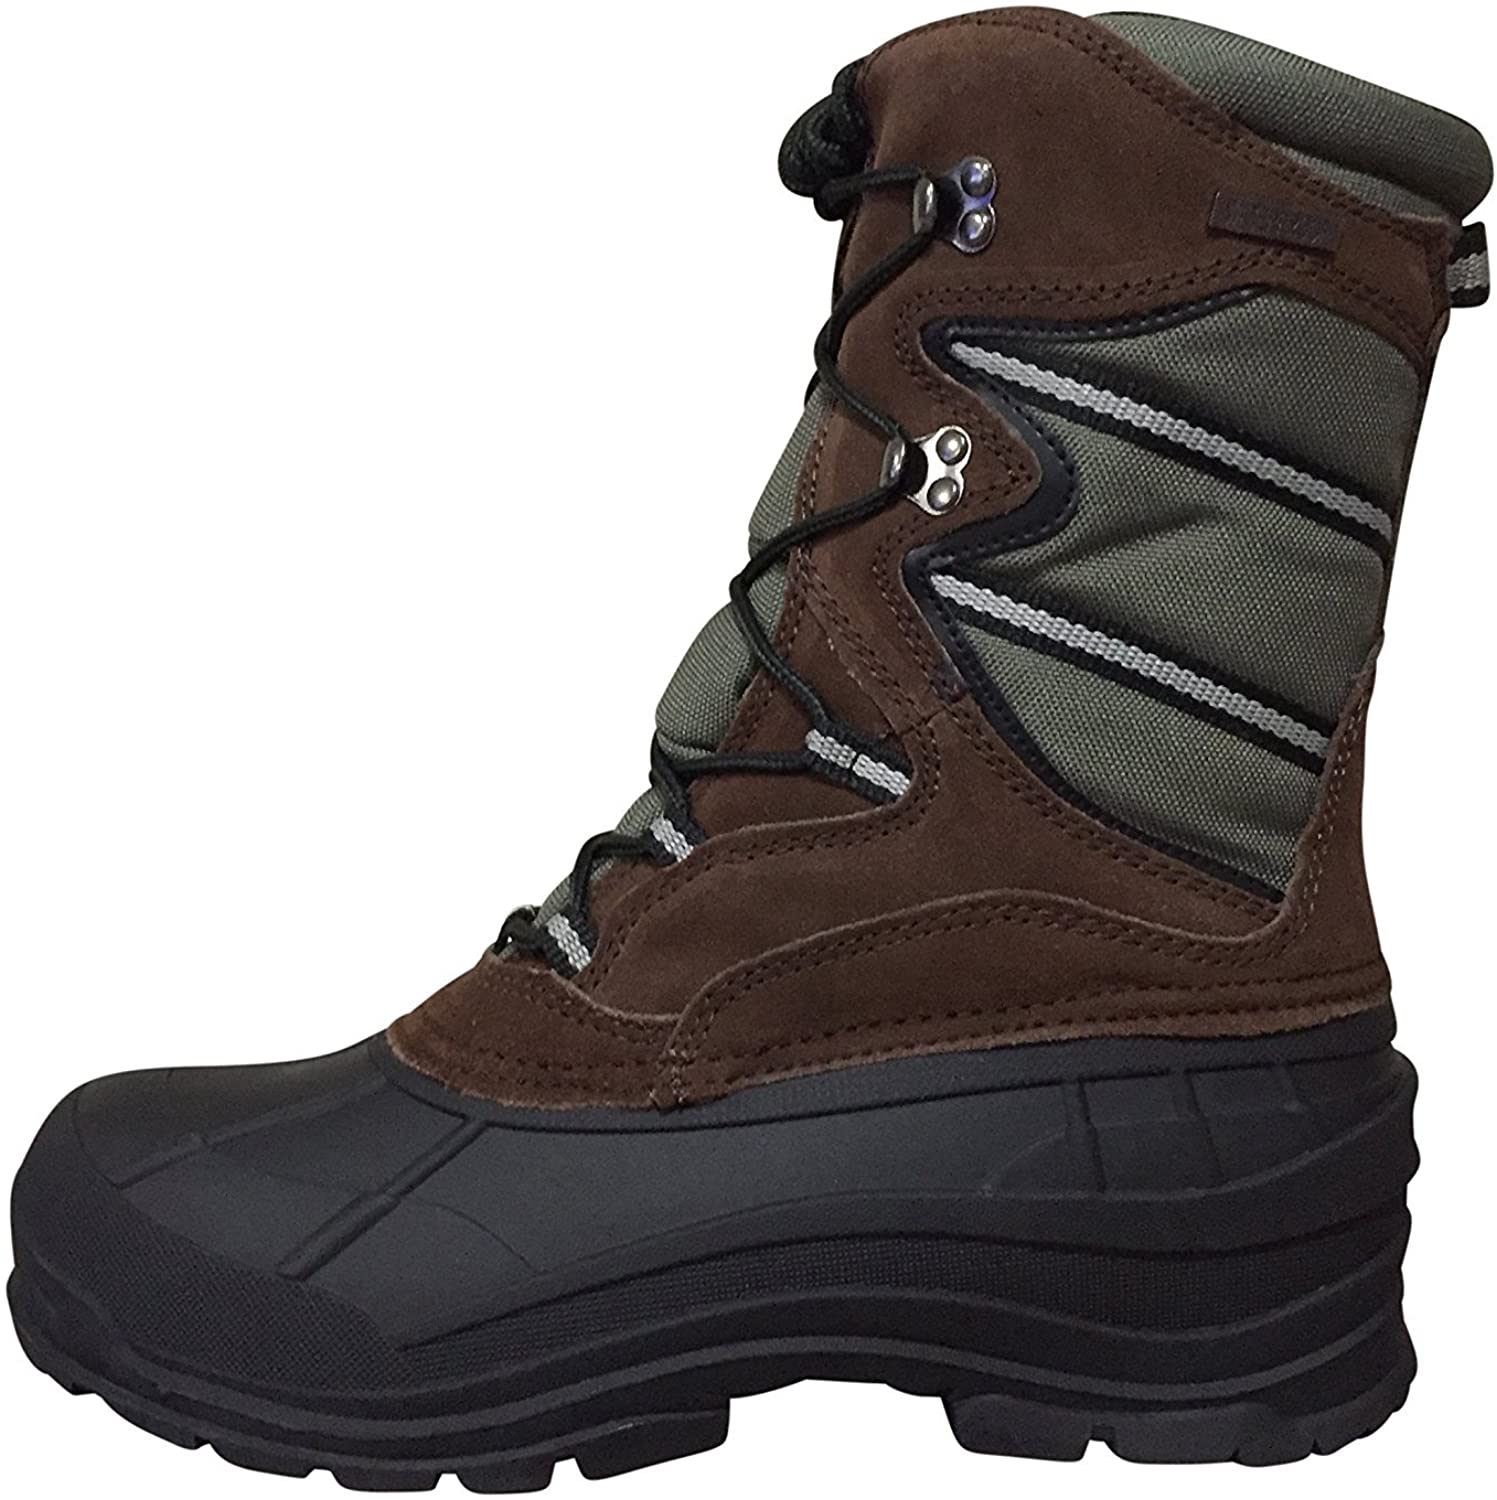 Men's Winter Boots 10" Hiking Leather Nylon Thinsulate Hunting Snow Boots - image 2 of 5